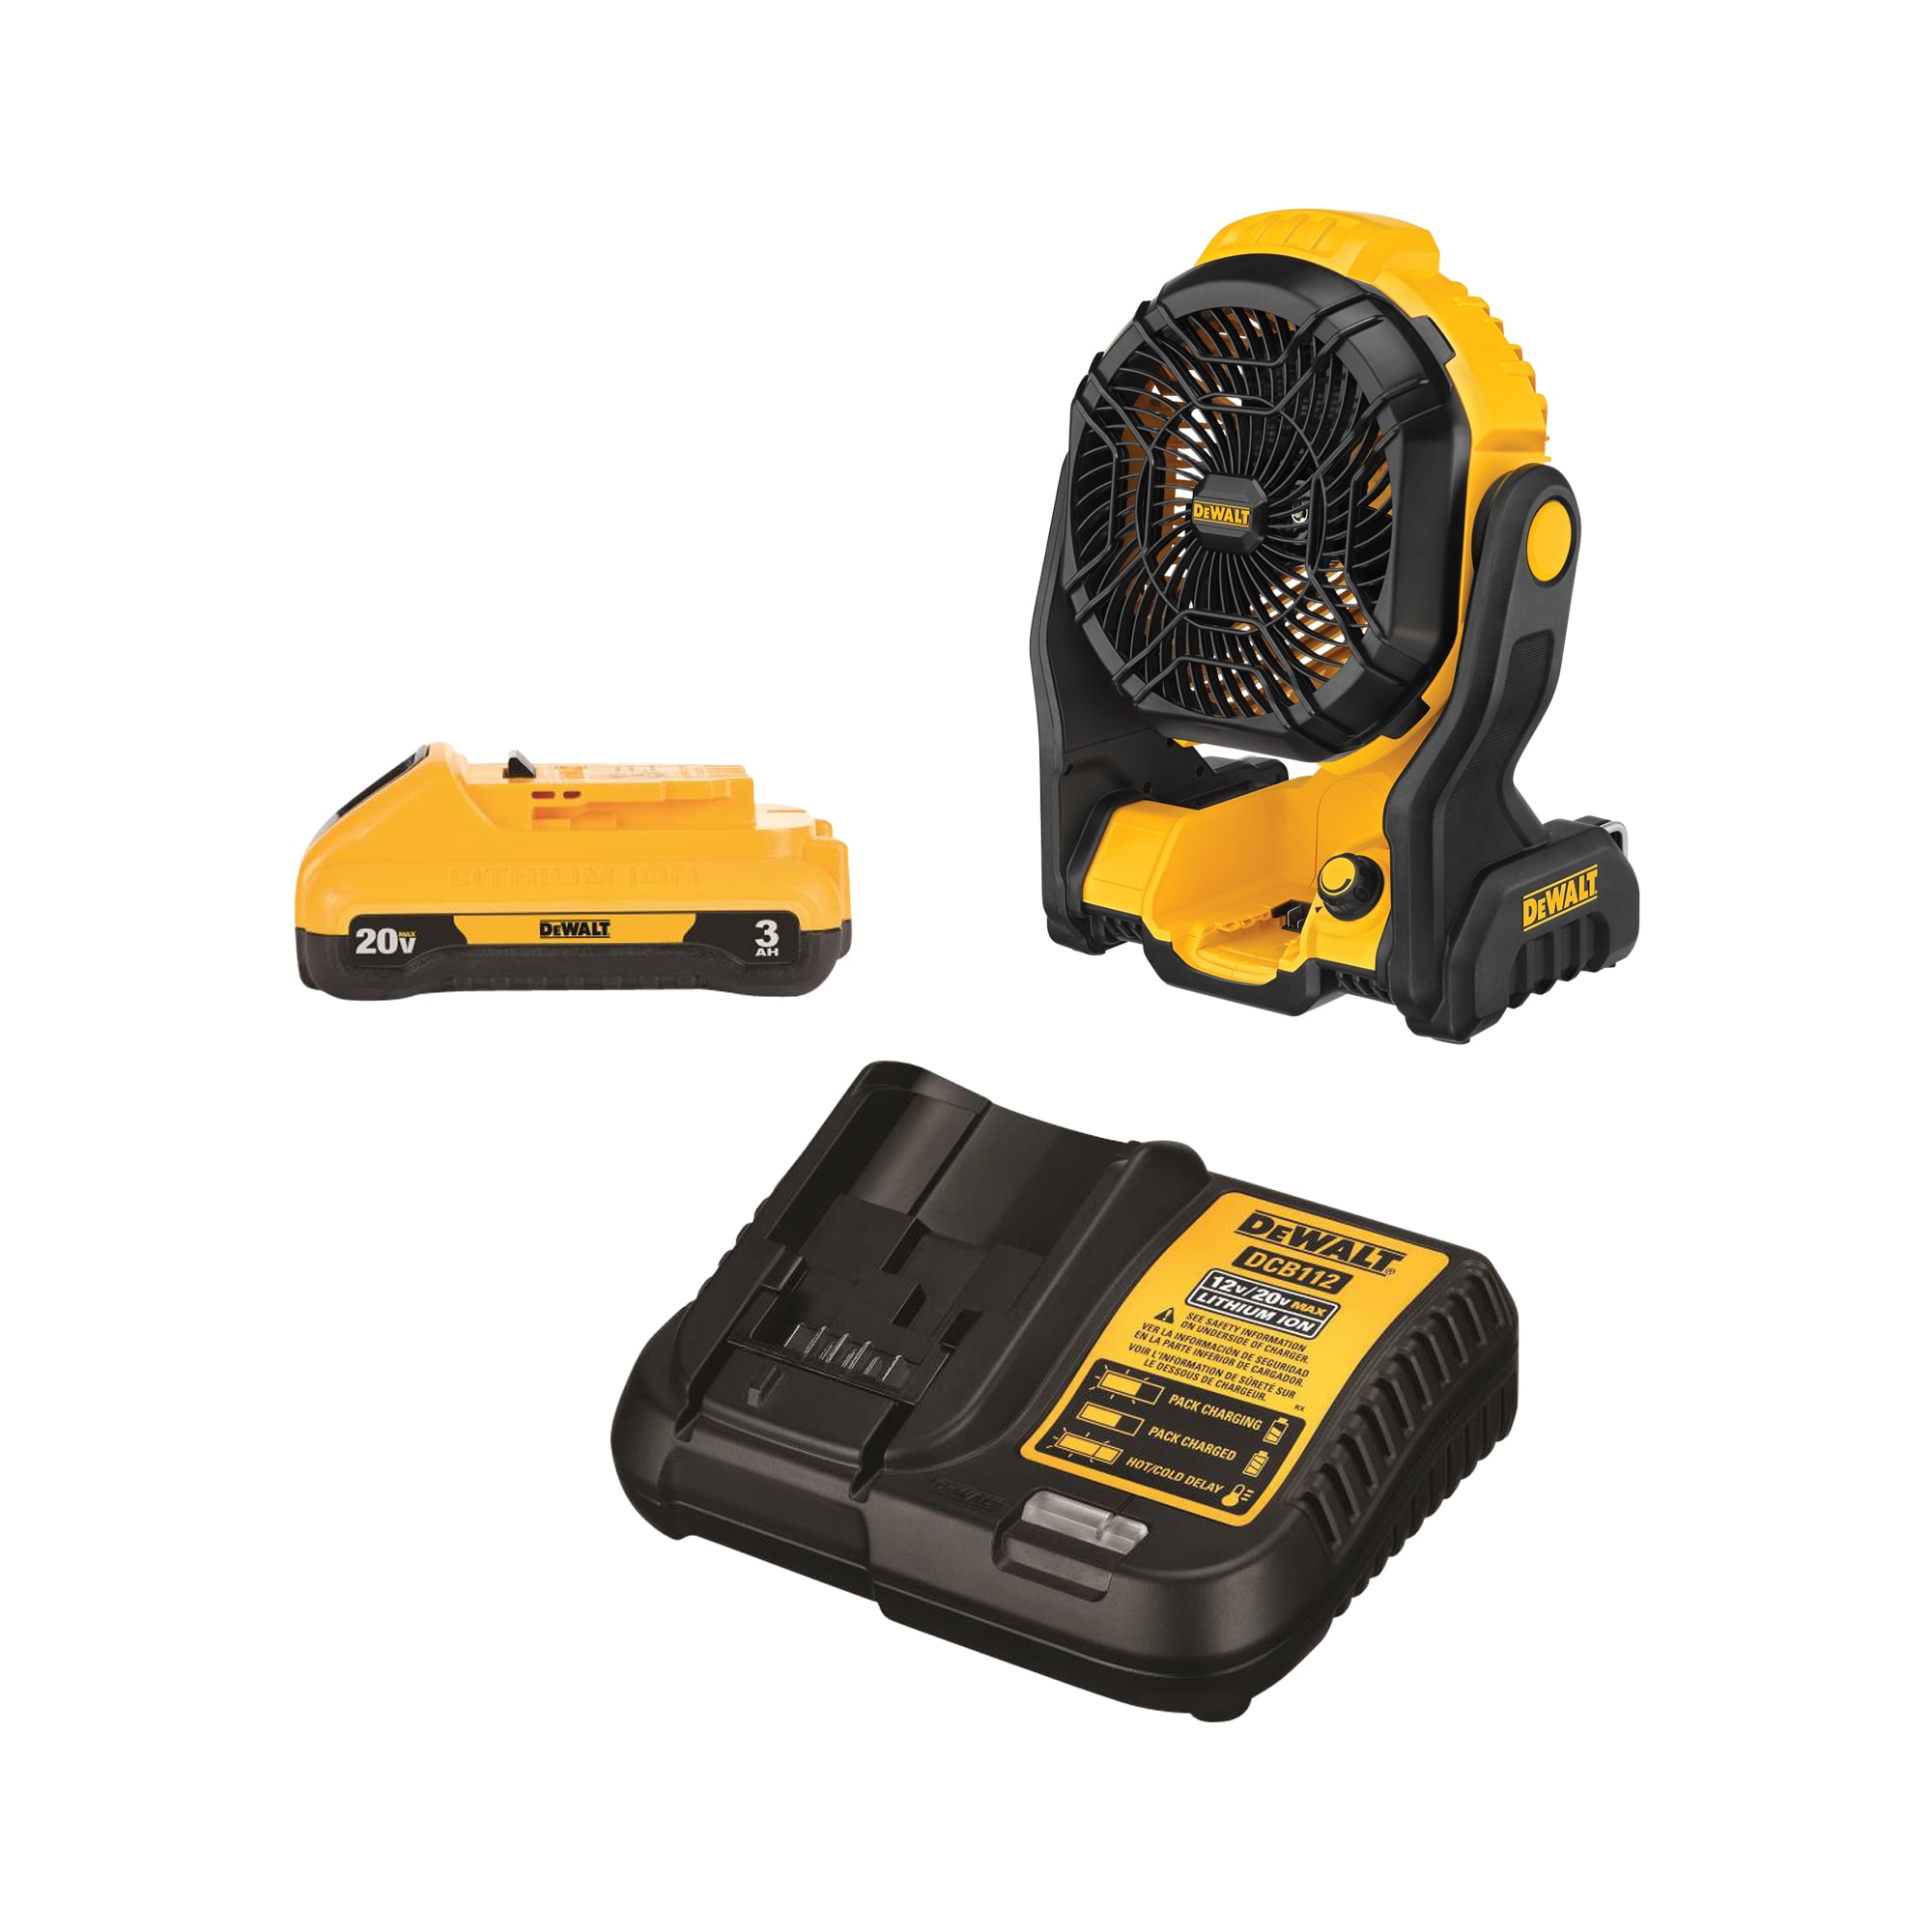 DEWALT 20-volt Jobsite Blower & 20-Volt Max 3 Amp-Hour Lithium Power Tool Battery Kit (Charger Included)